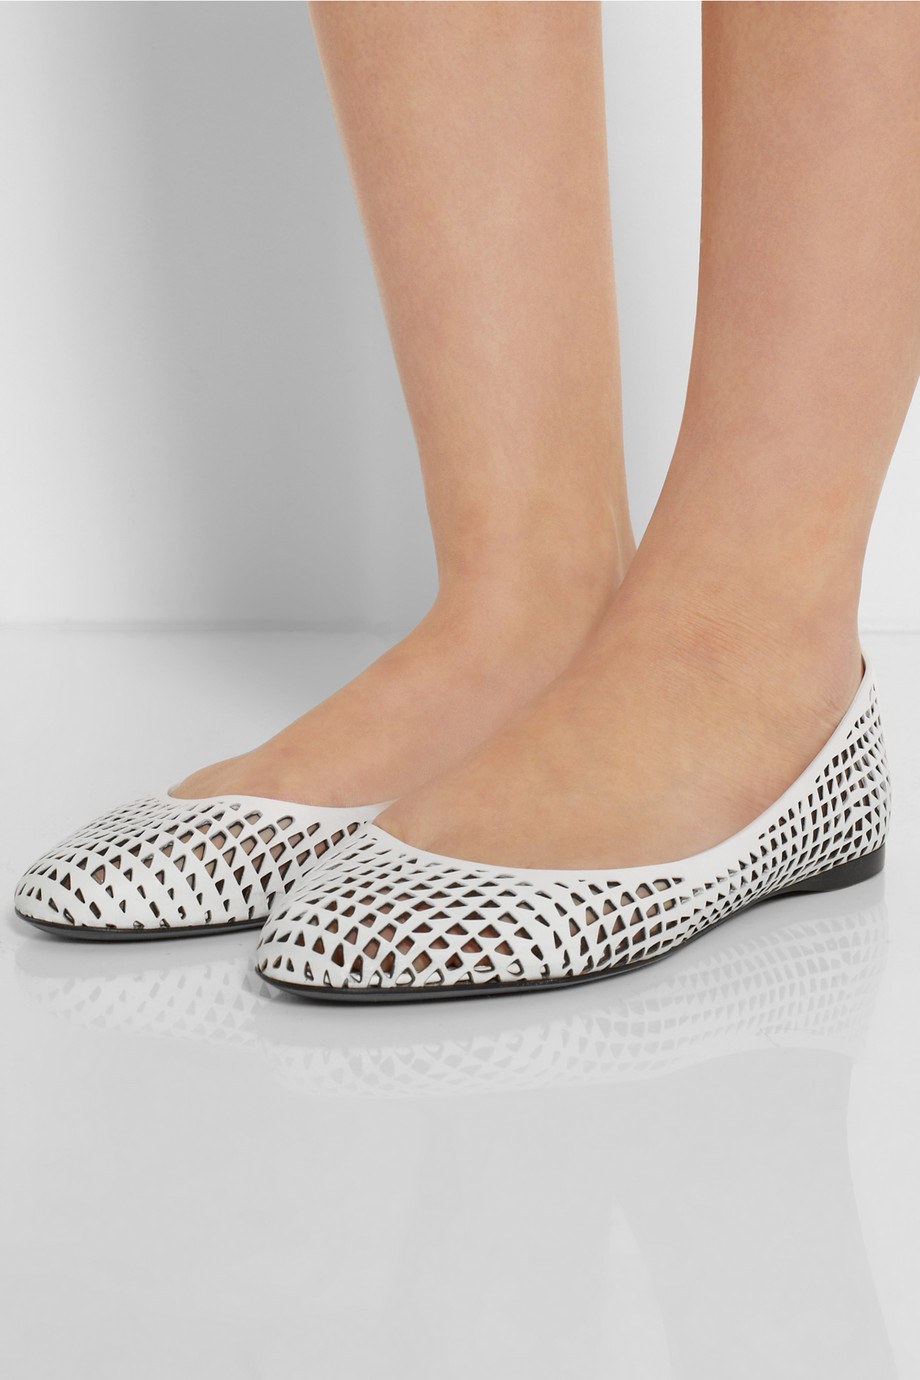 Jil Sander Perforated Leather Ballet Flats in White - Lyst